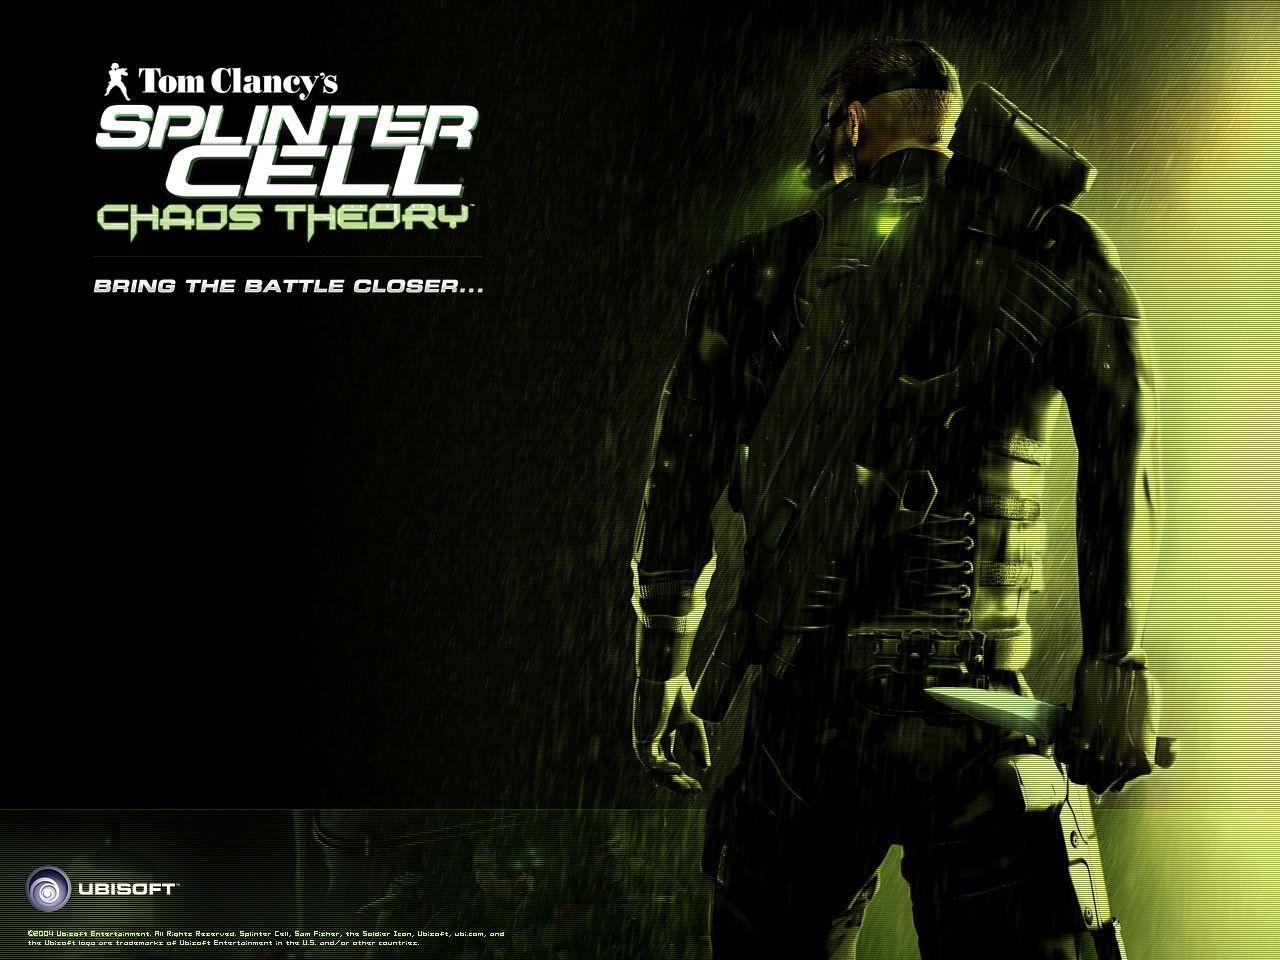 Metal Gear Solid 3: Snake Eater vs Splinter Cell: Chaos Theory